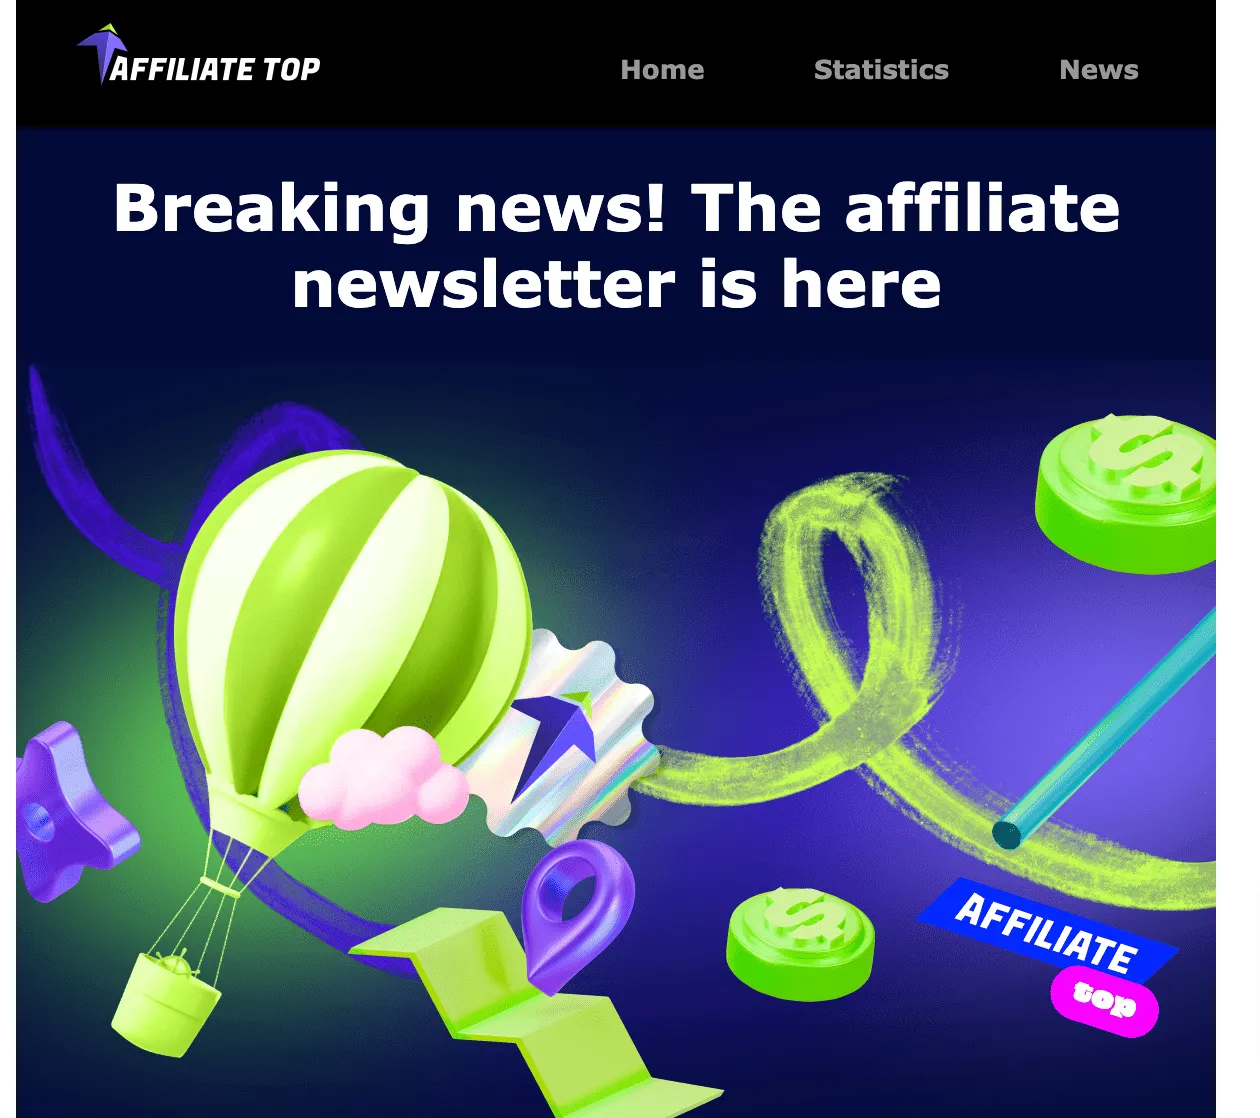 Affiliate Top Review- Events and Contests